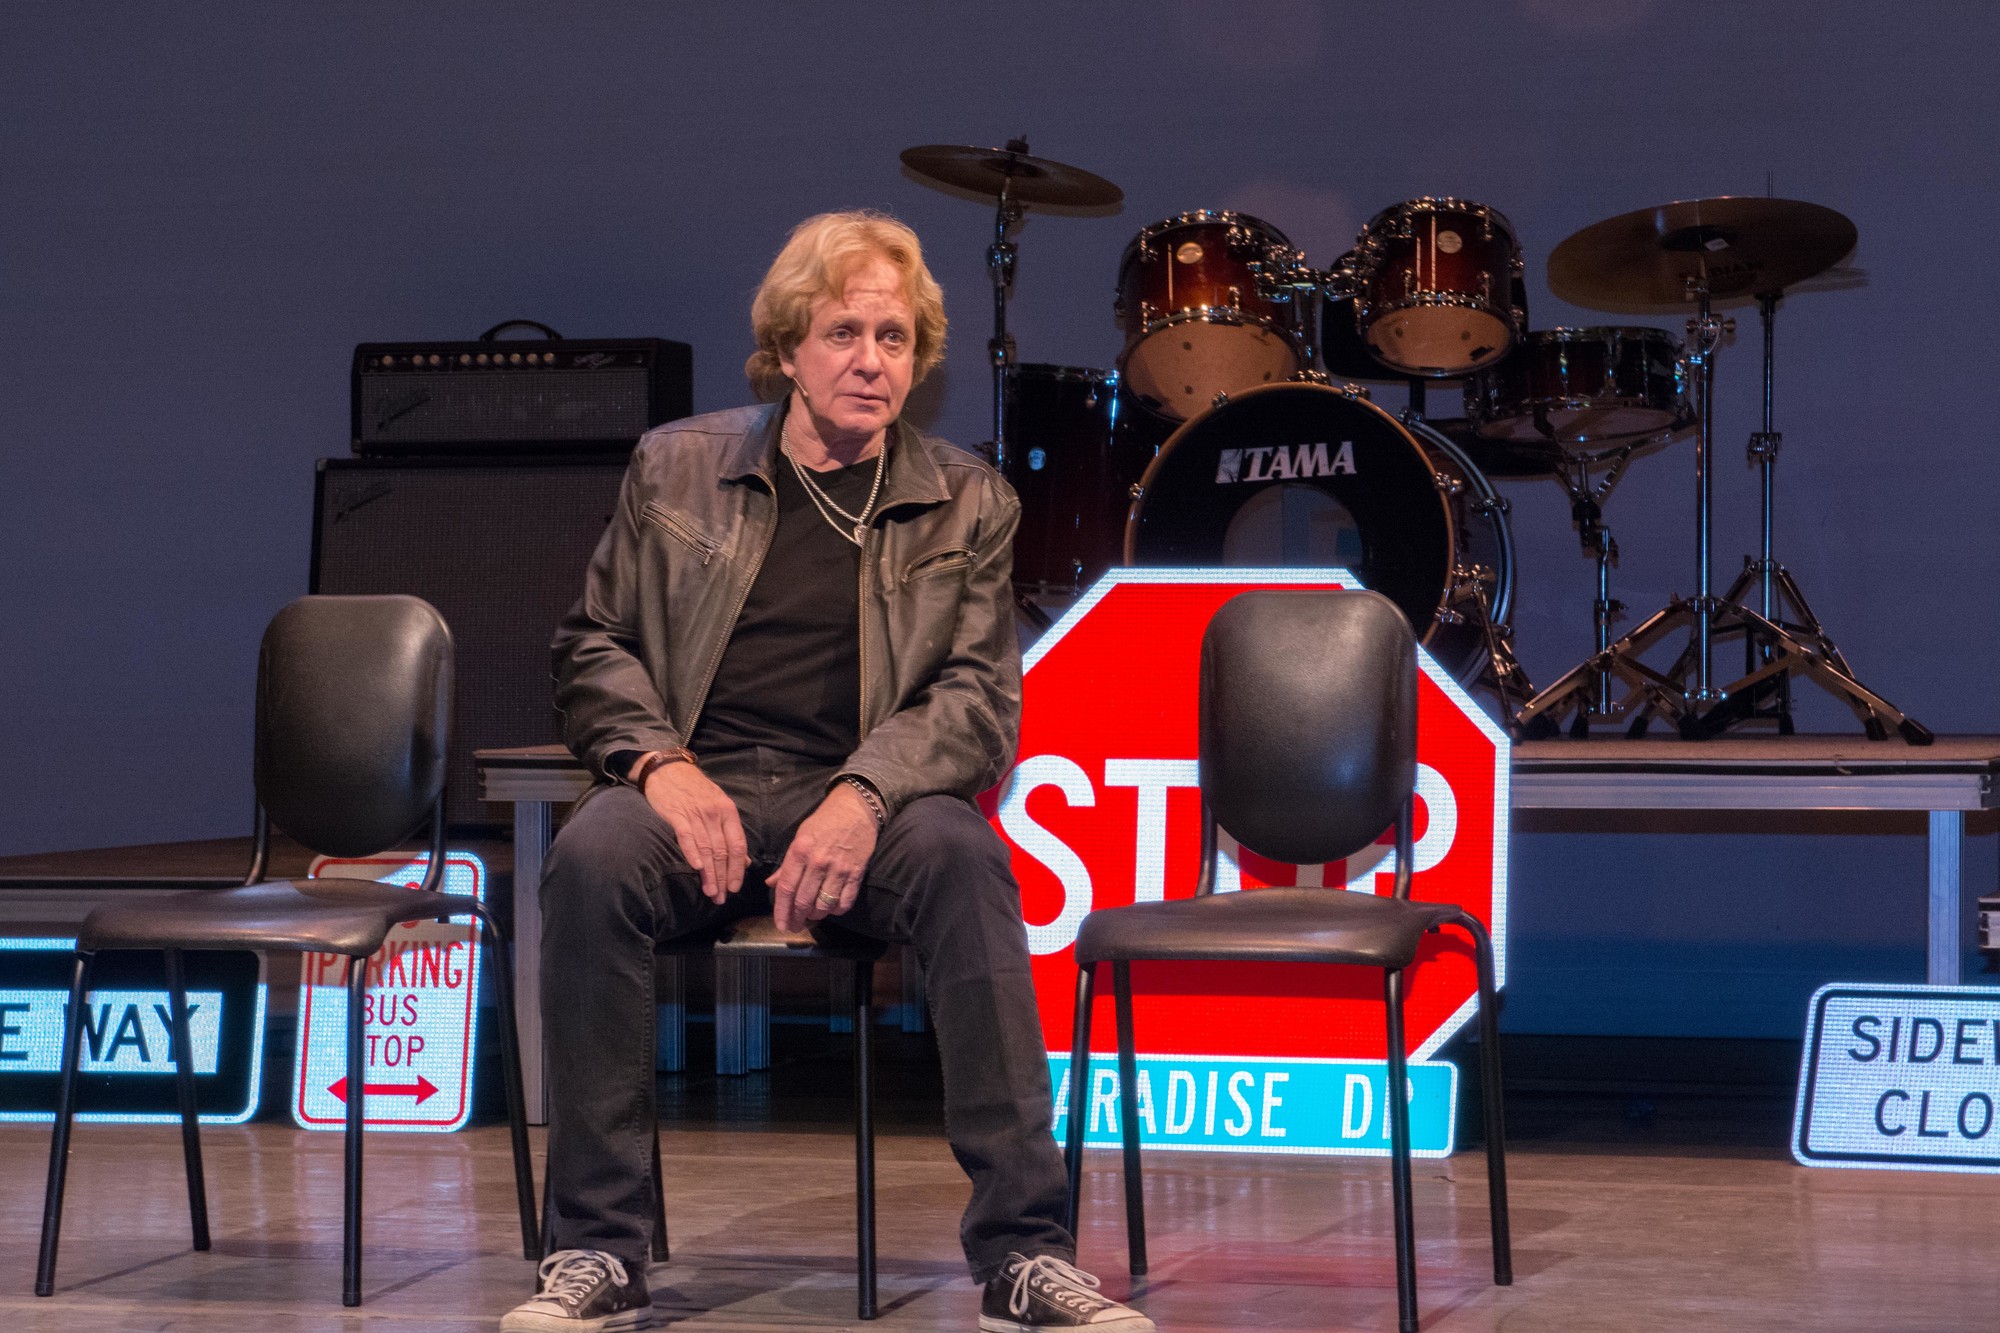 Eddie Money told the audience at Molloy College his life story.